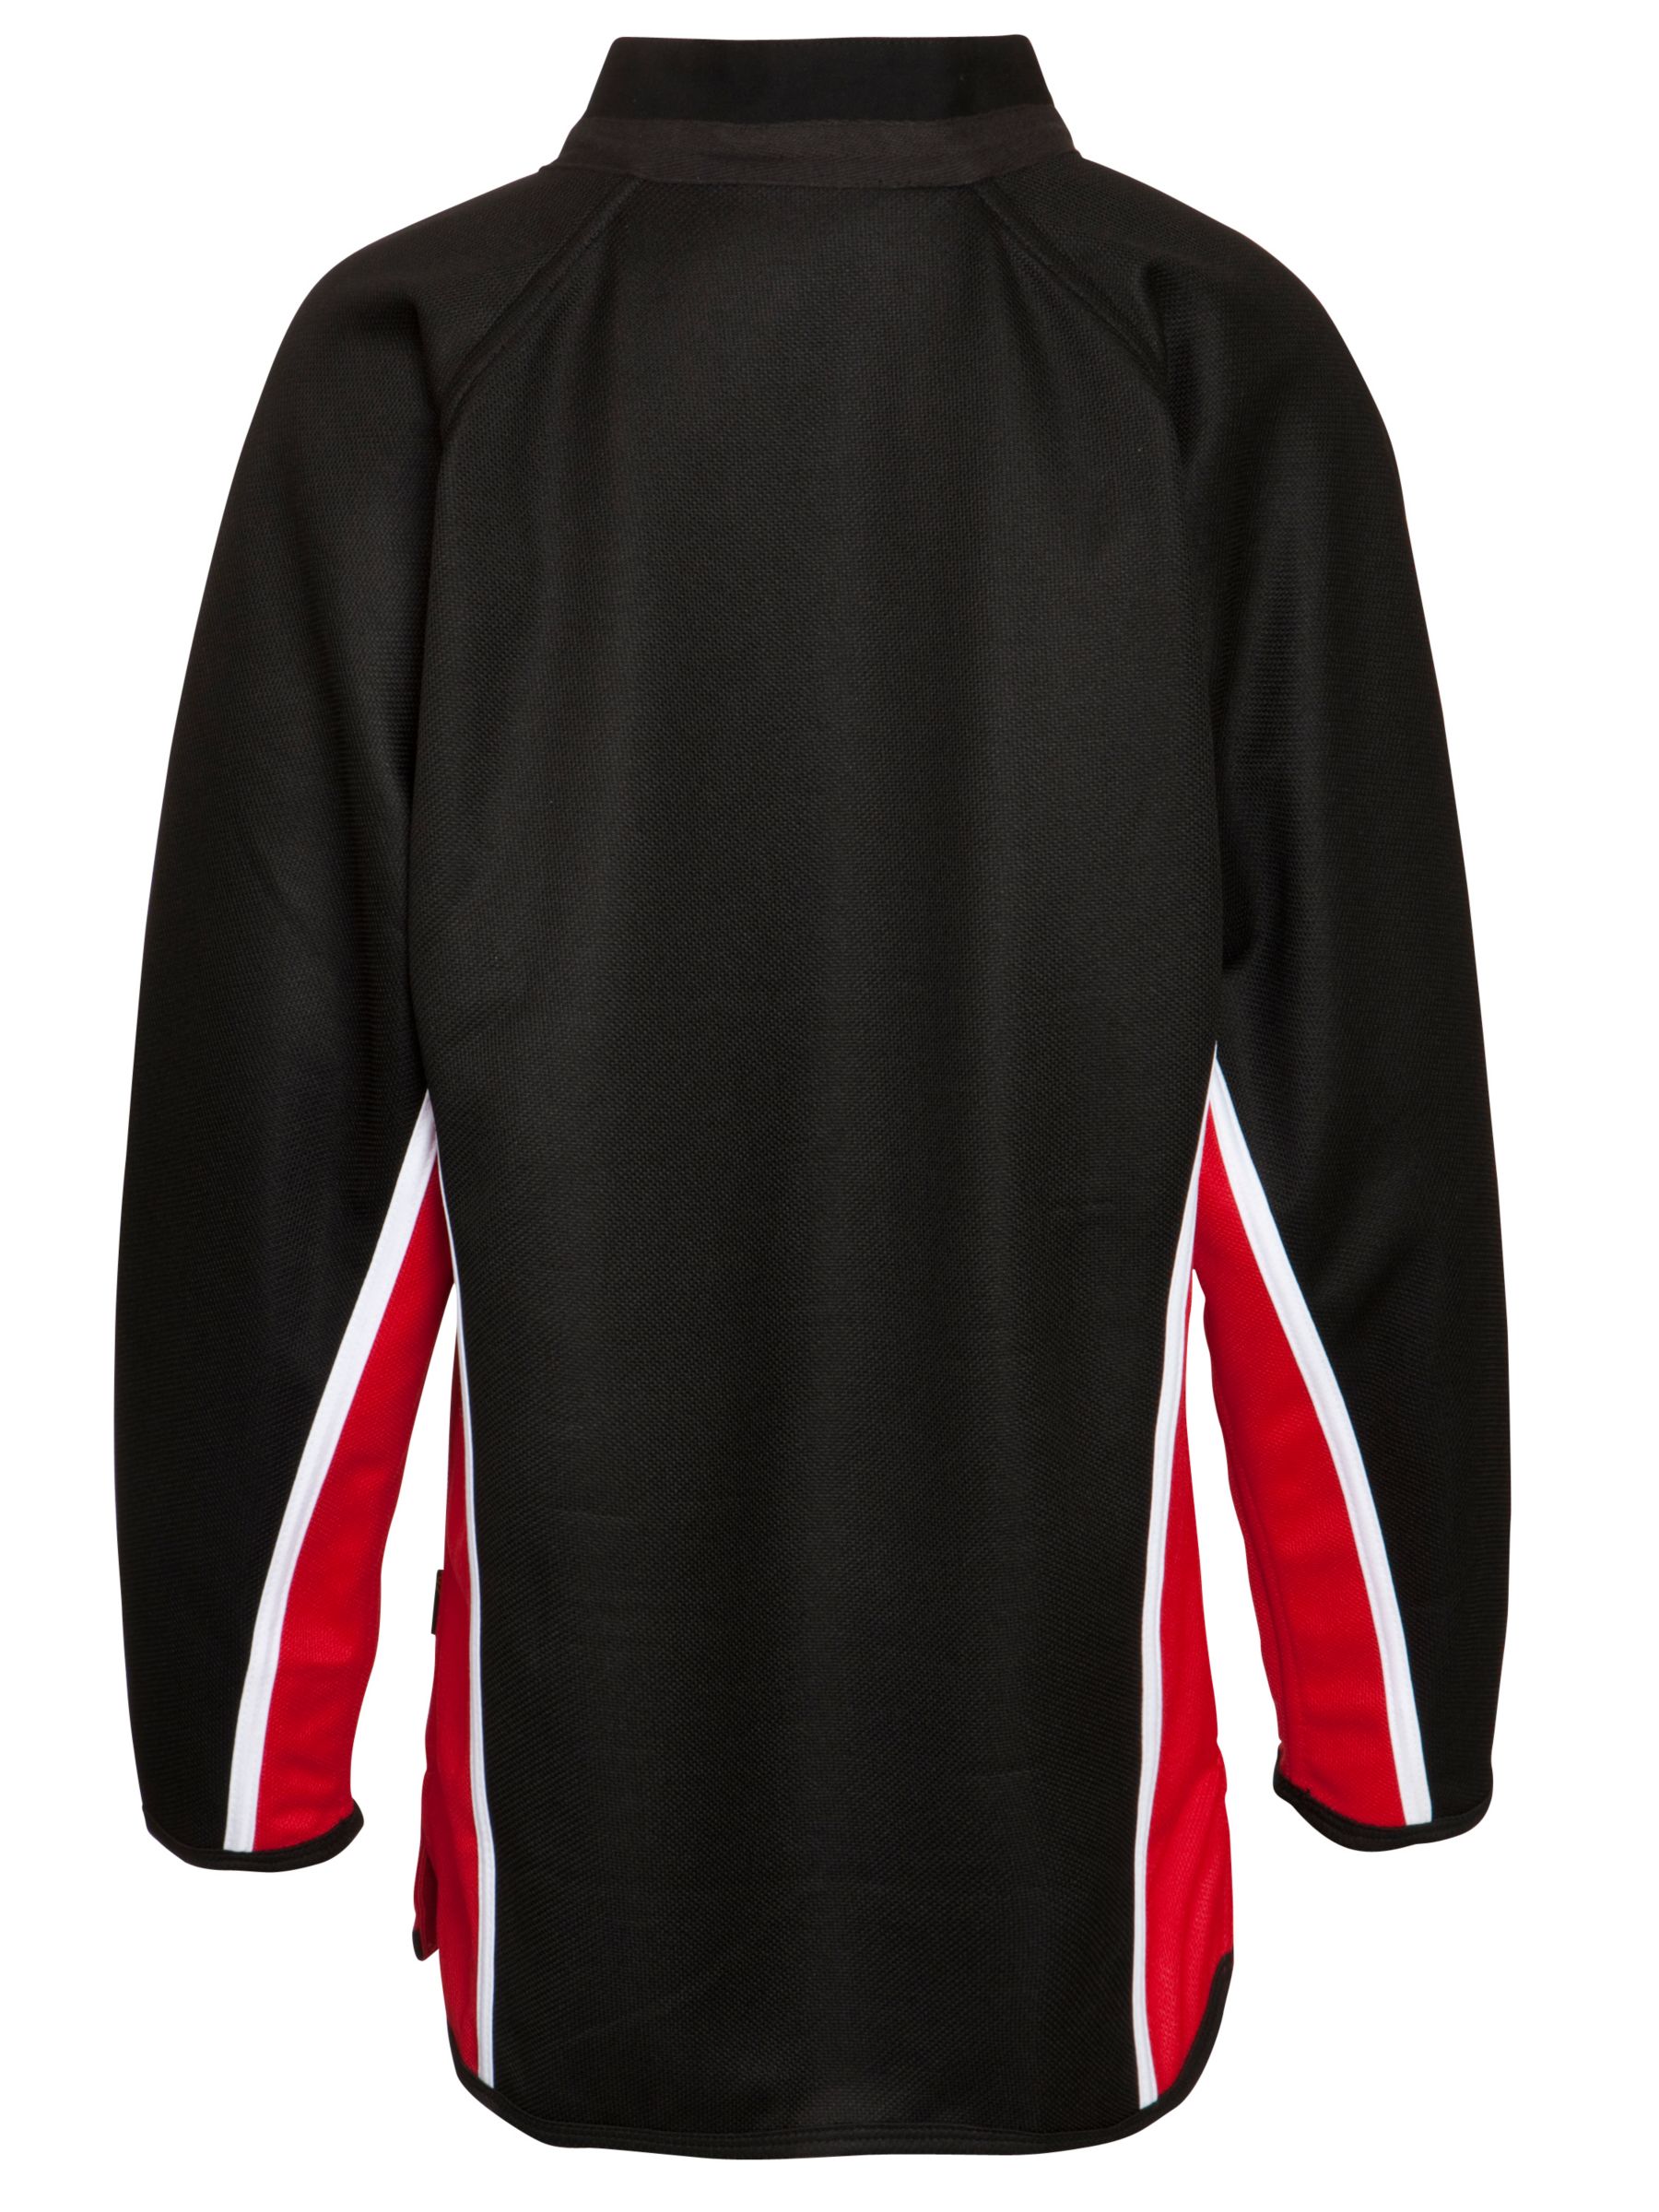 red and black rugby jersey